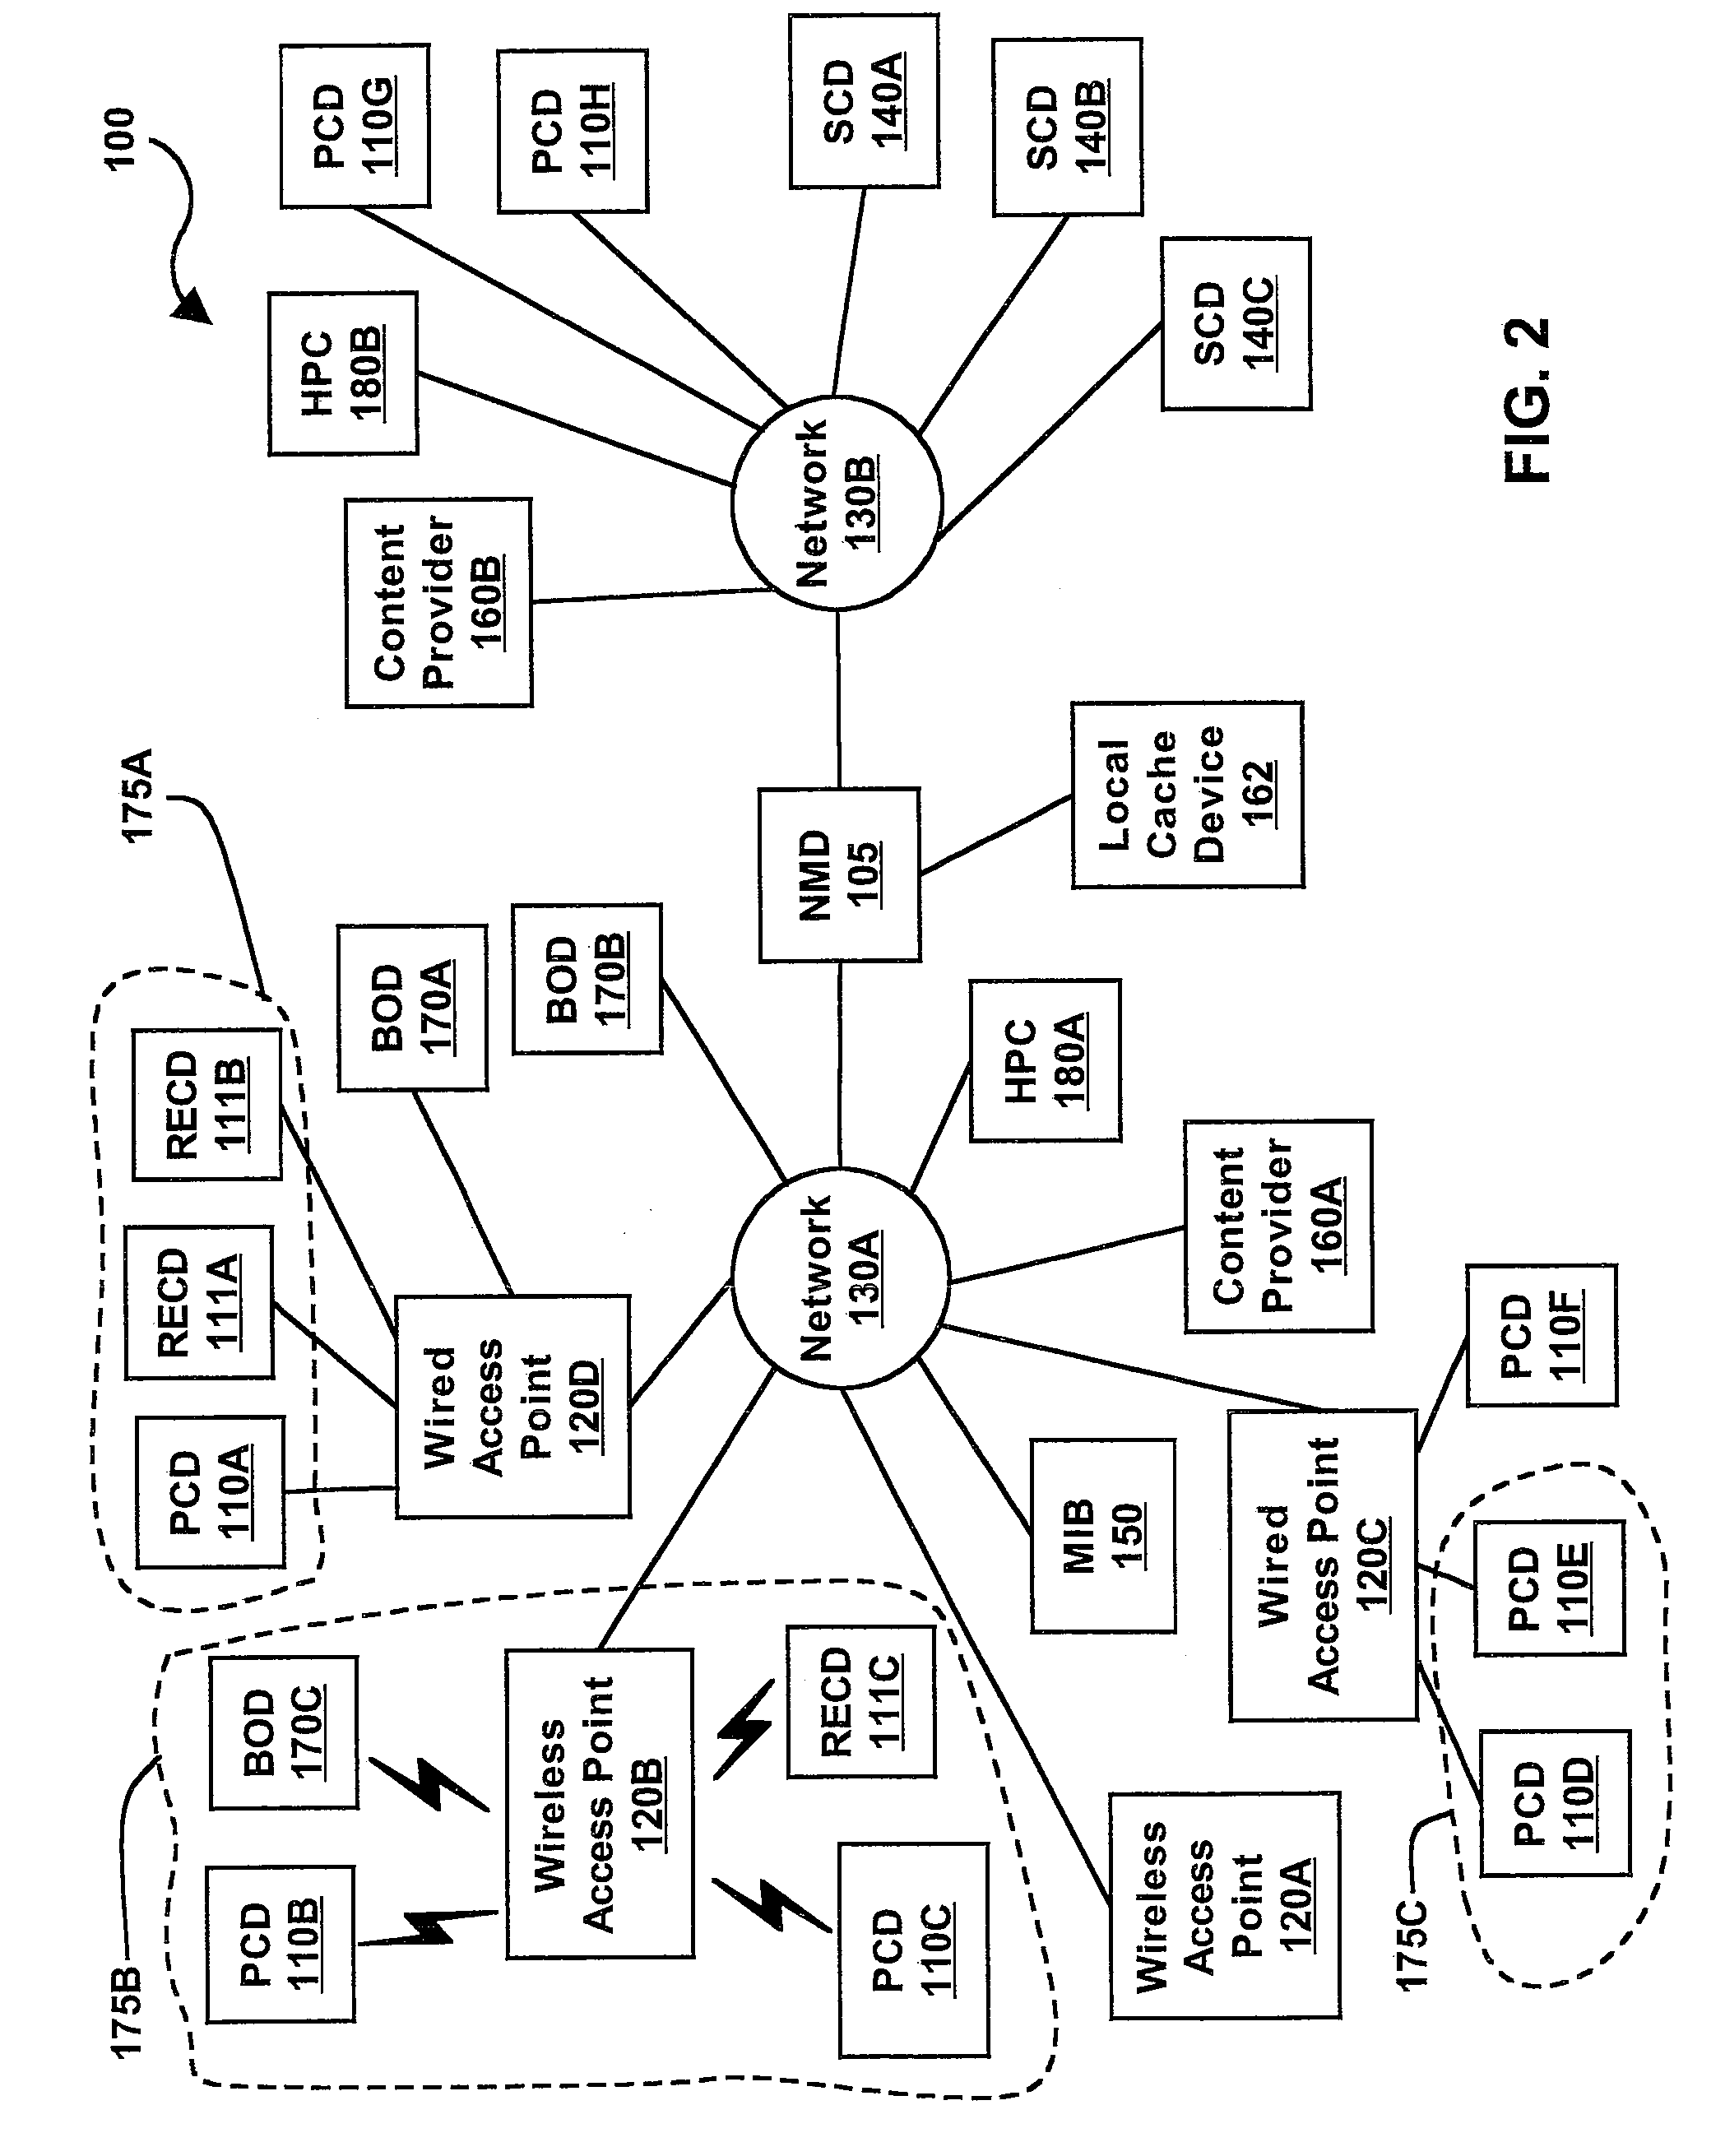 System and Method for Providing Application Categorization and Quality of Service in a Network With Multiple Users